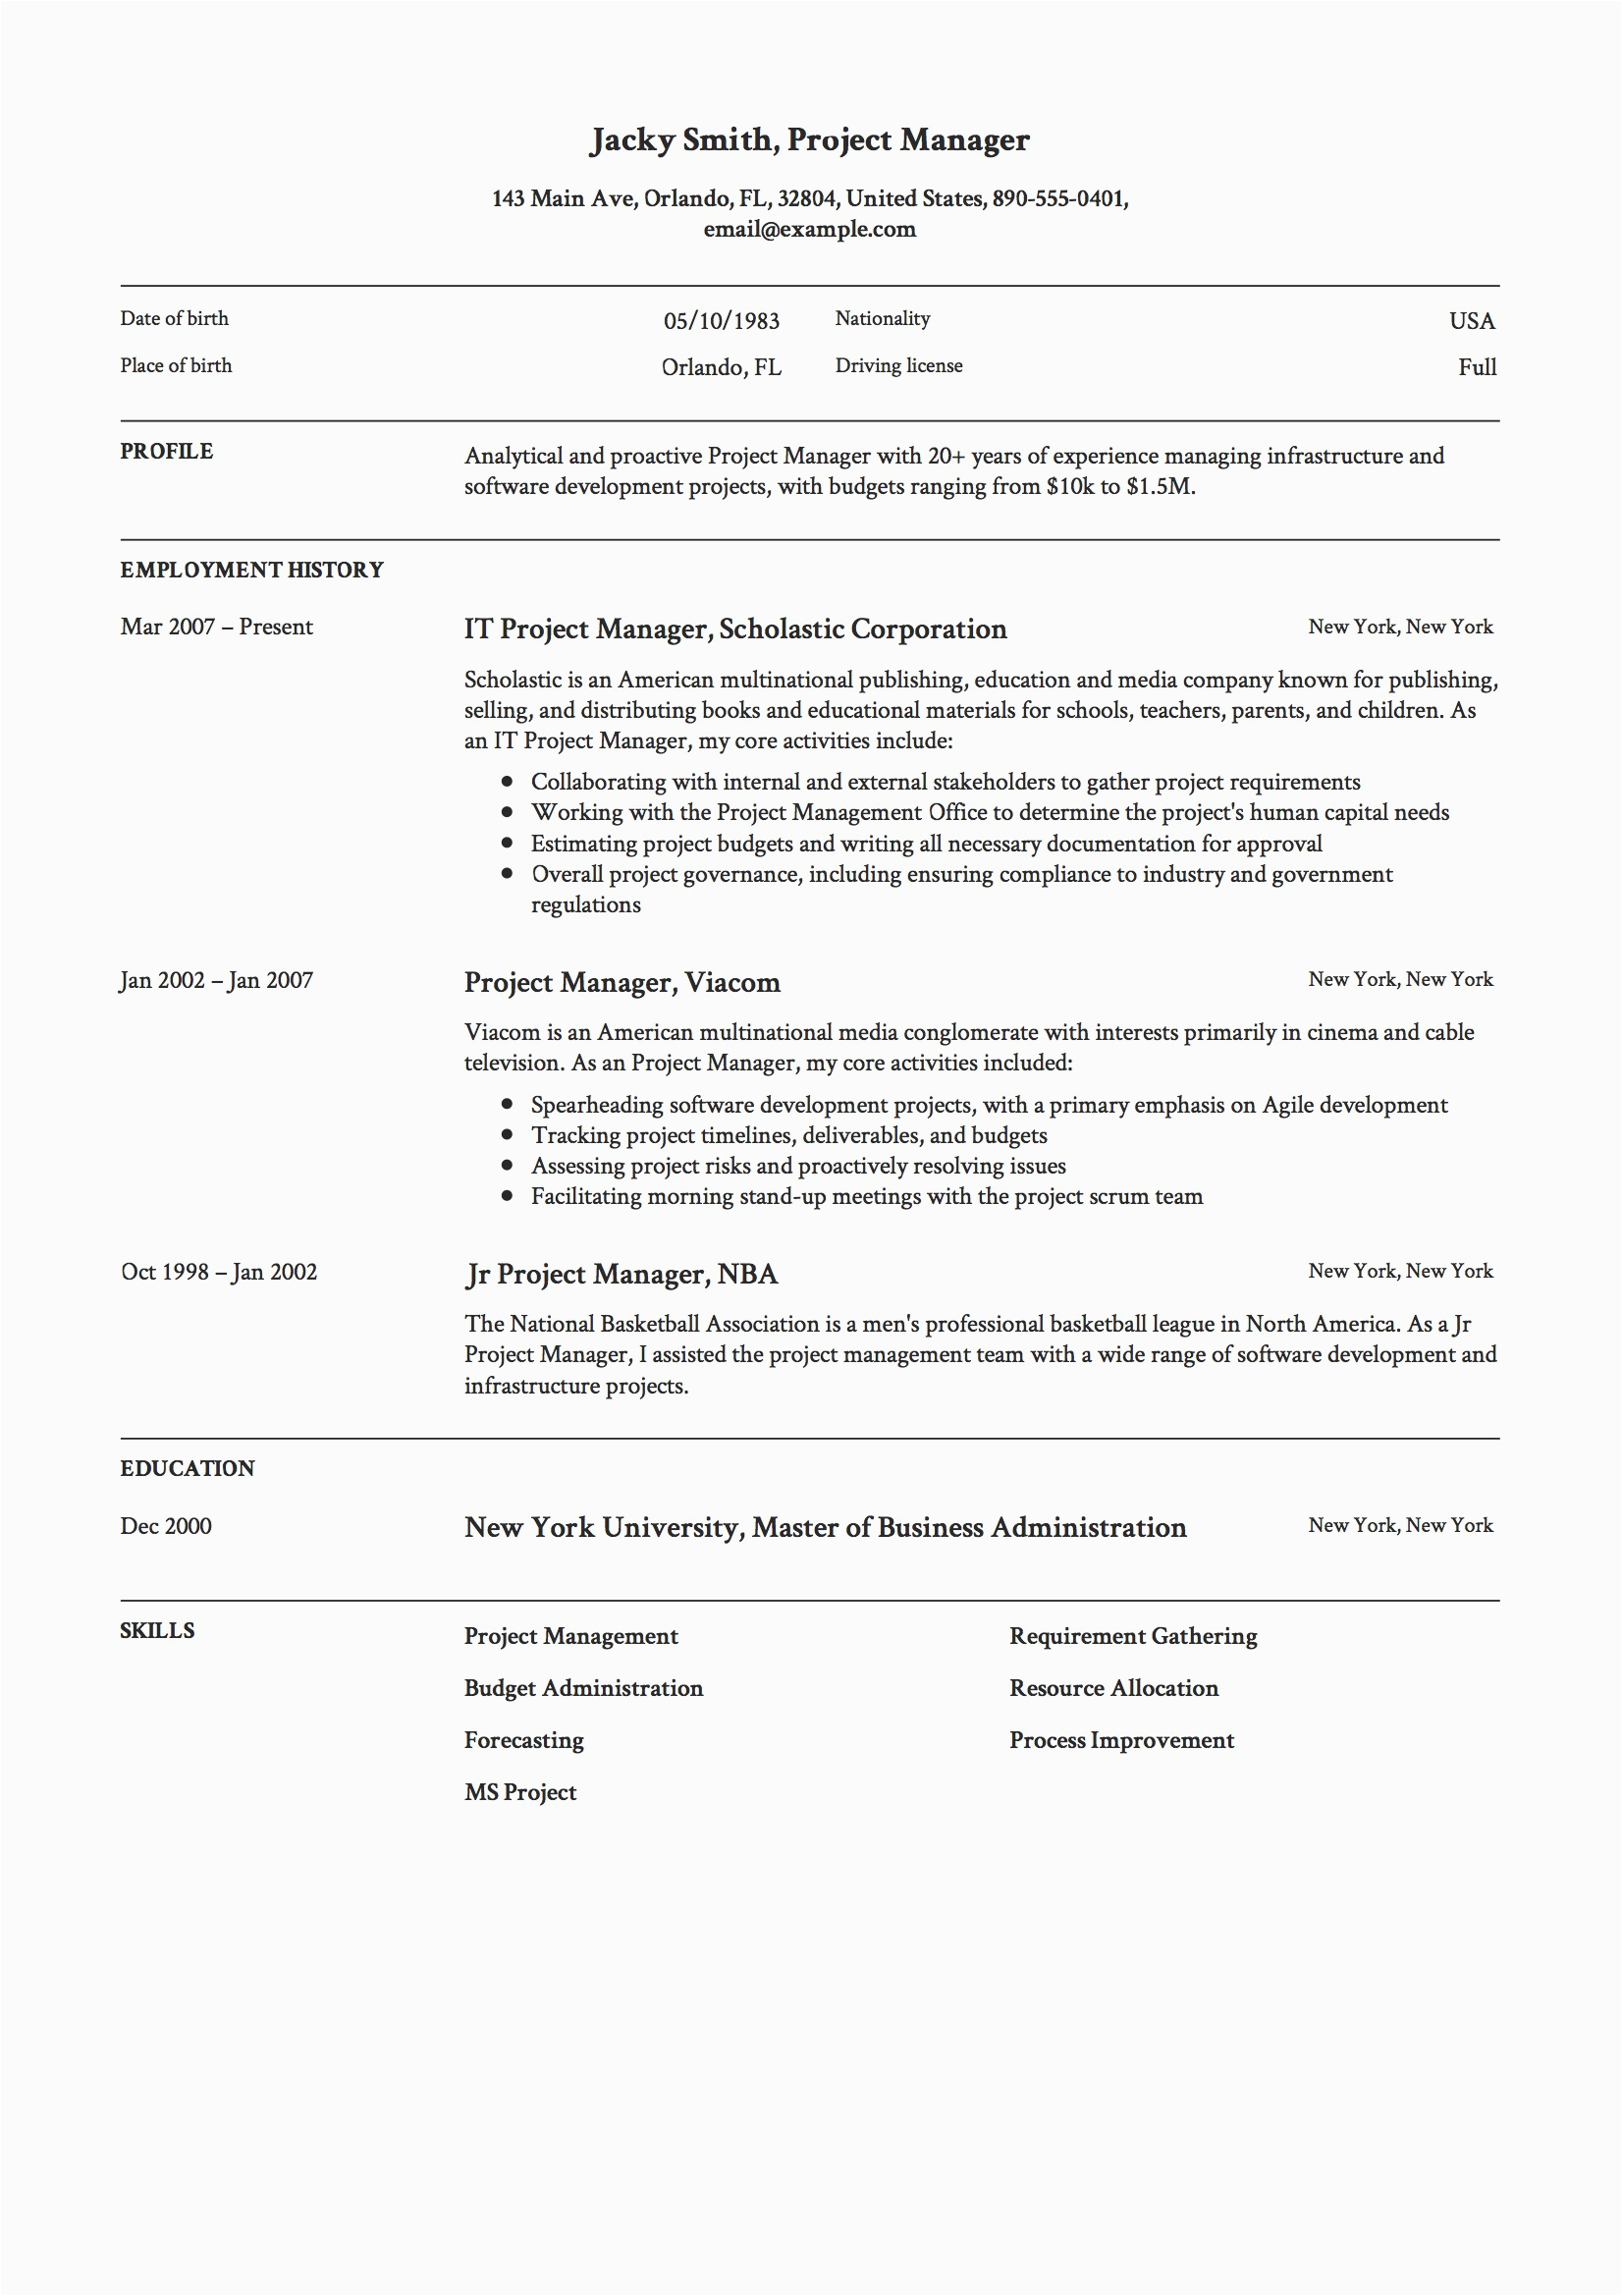 Sample Resume for Project Manager Position Project Manager Resume & Full Guide